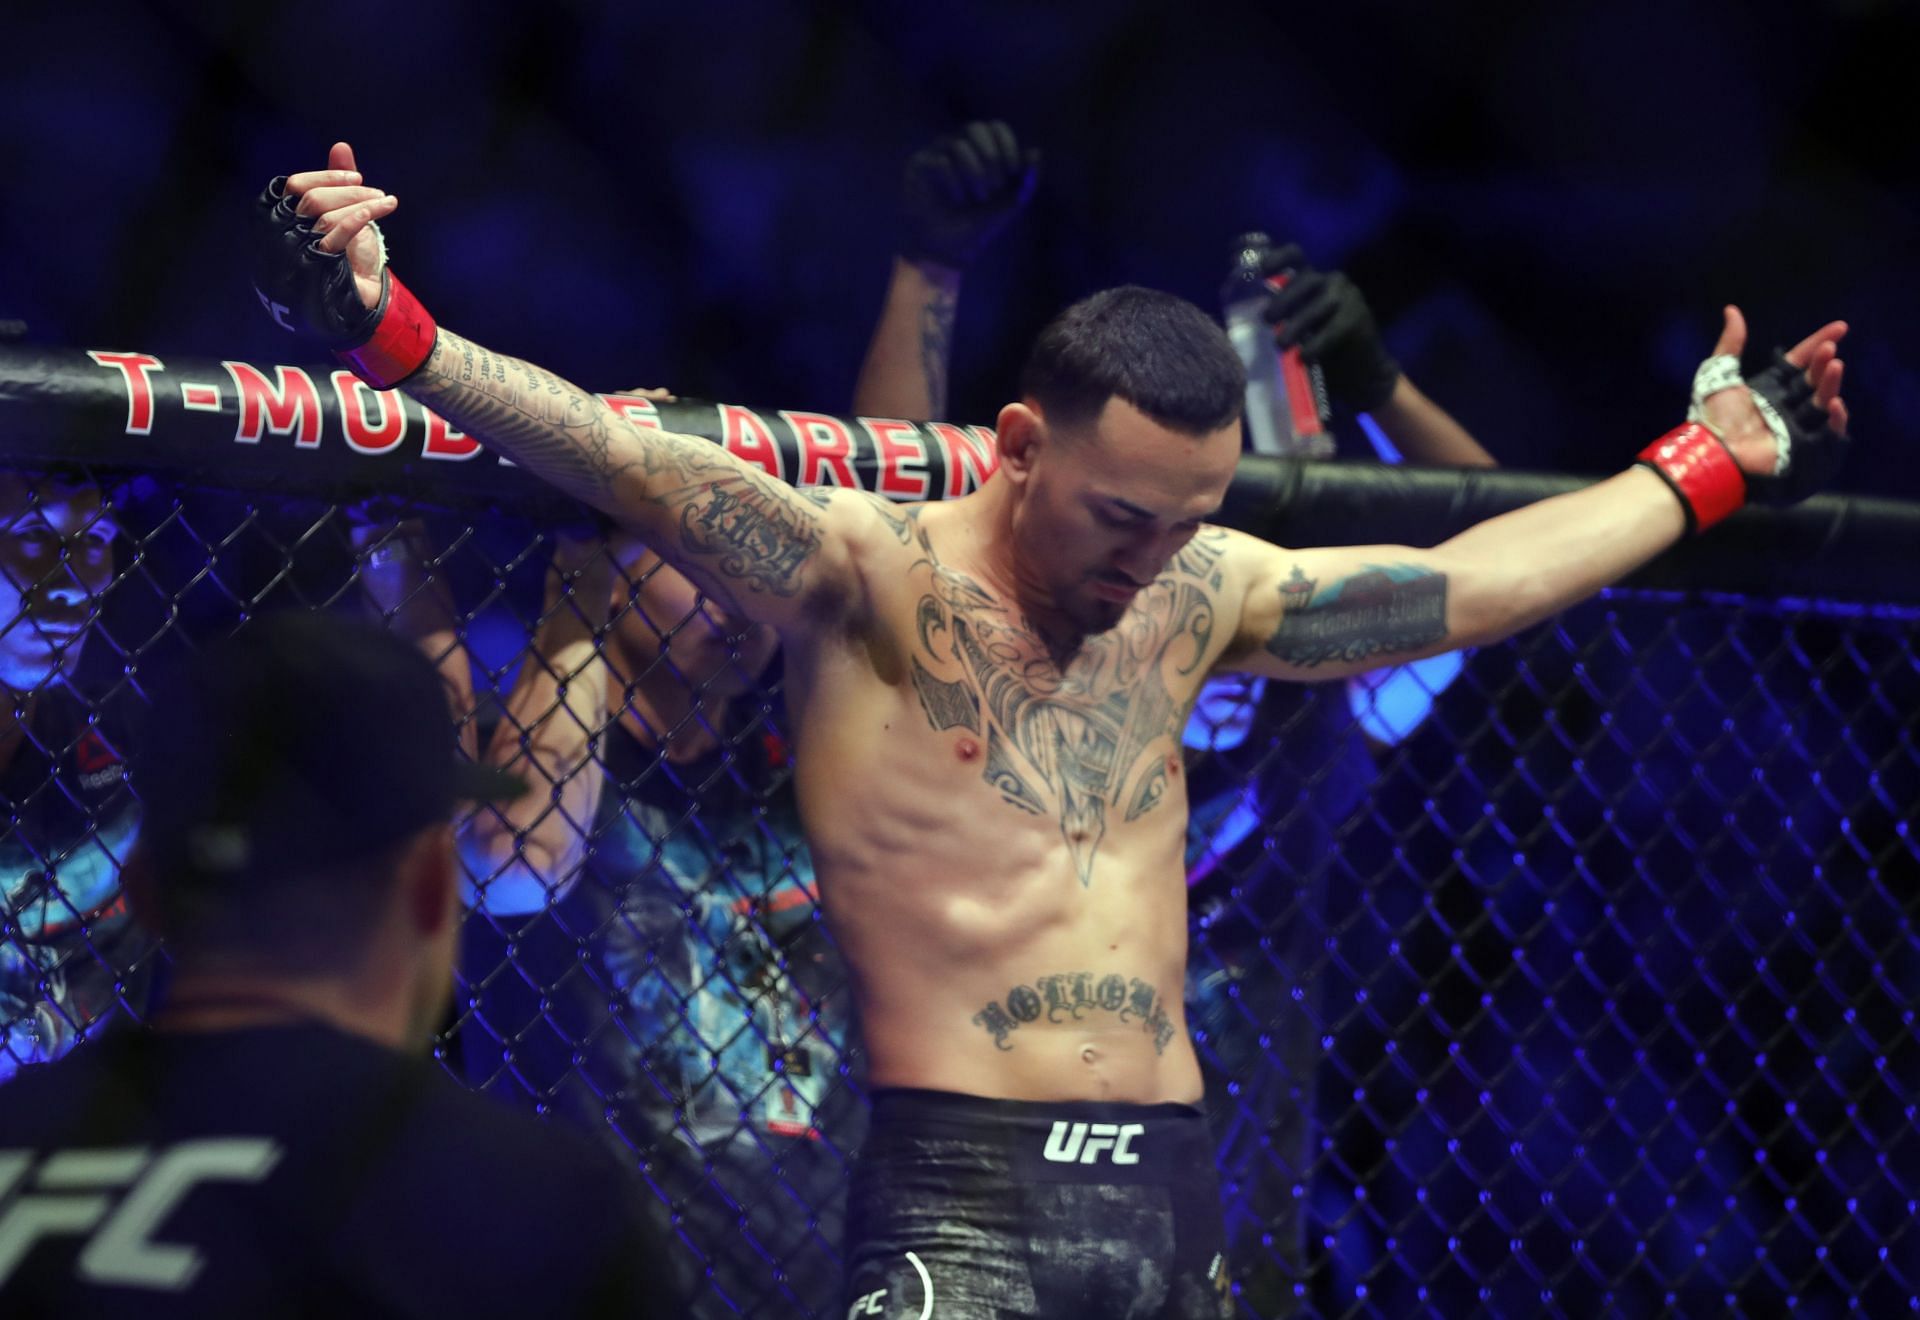 Max Holloway cleaned up the UFC featherweight division after it was left in a mess in 2016